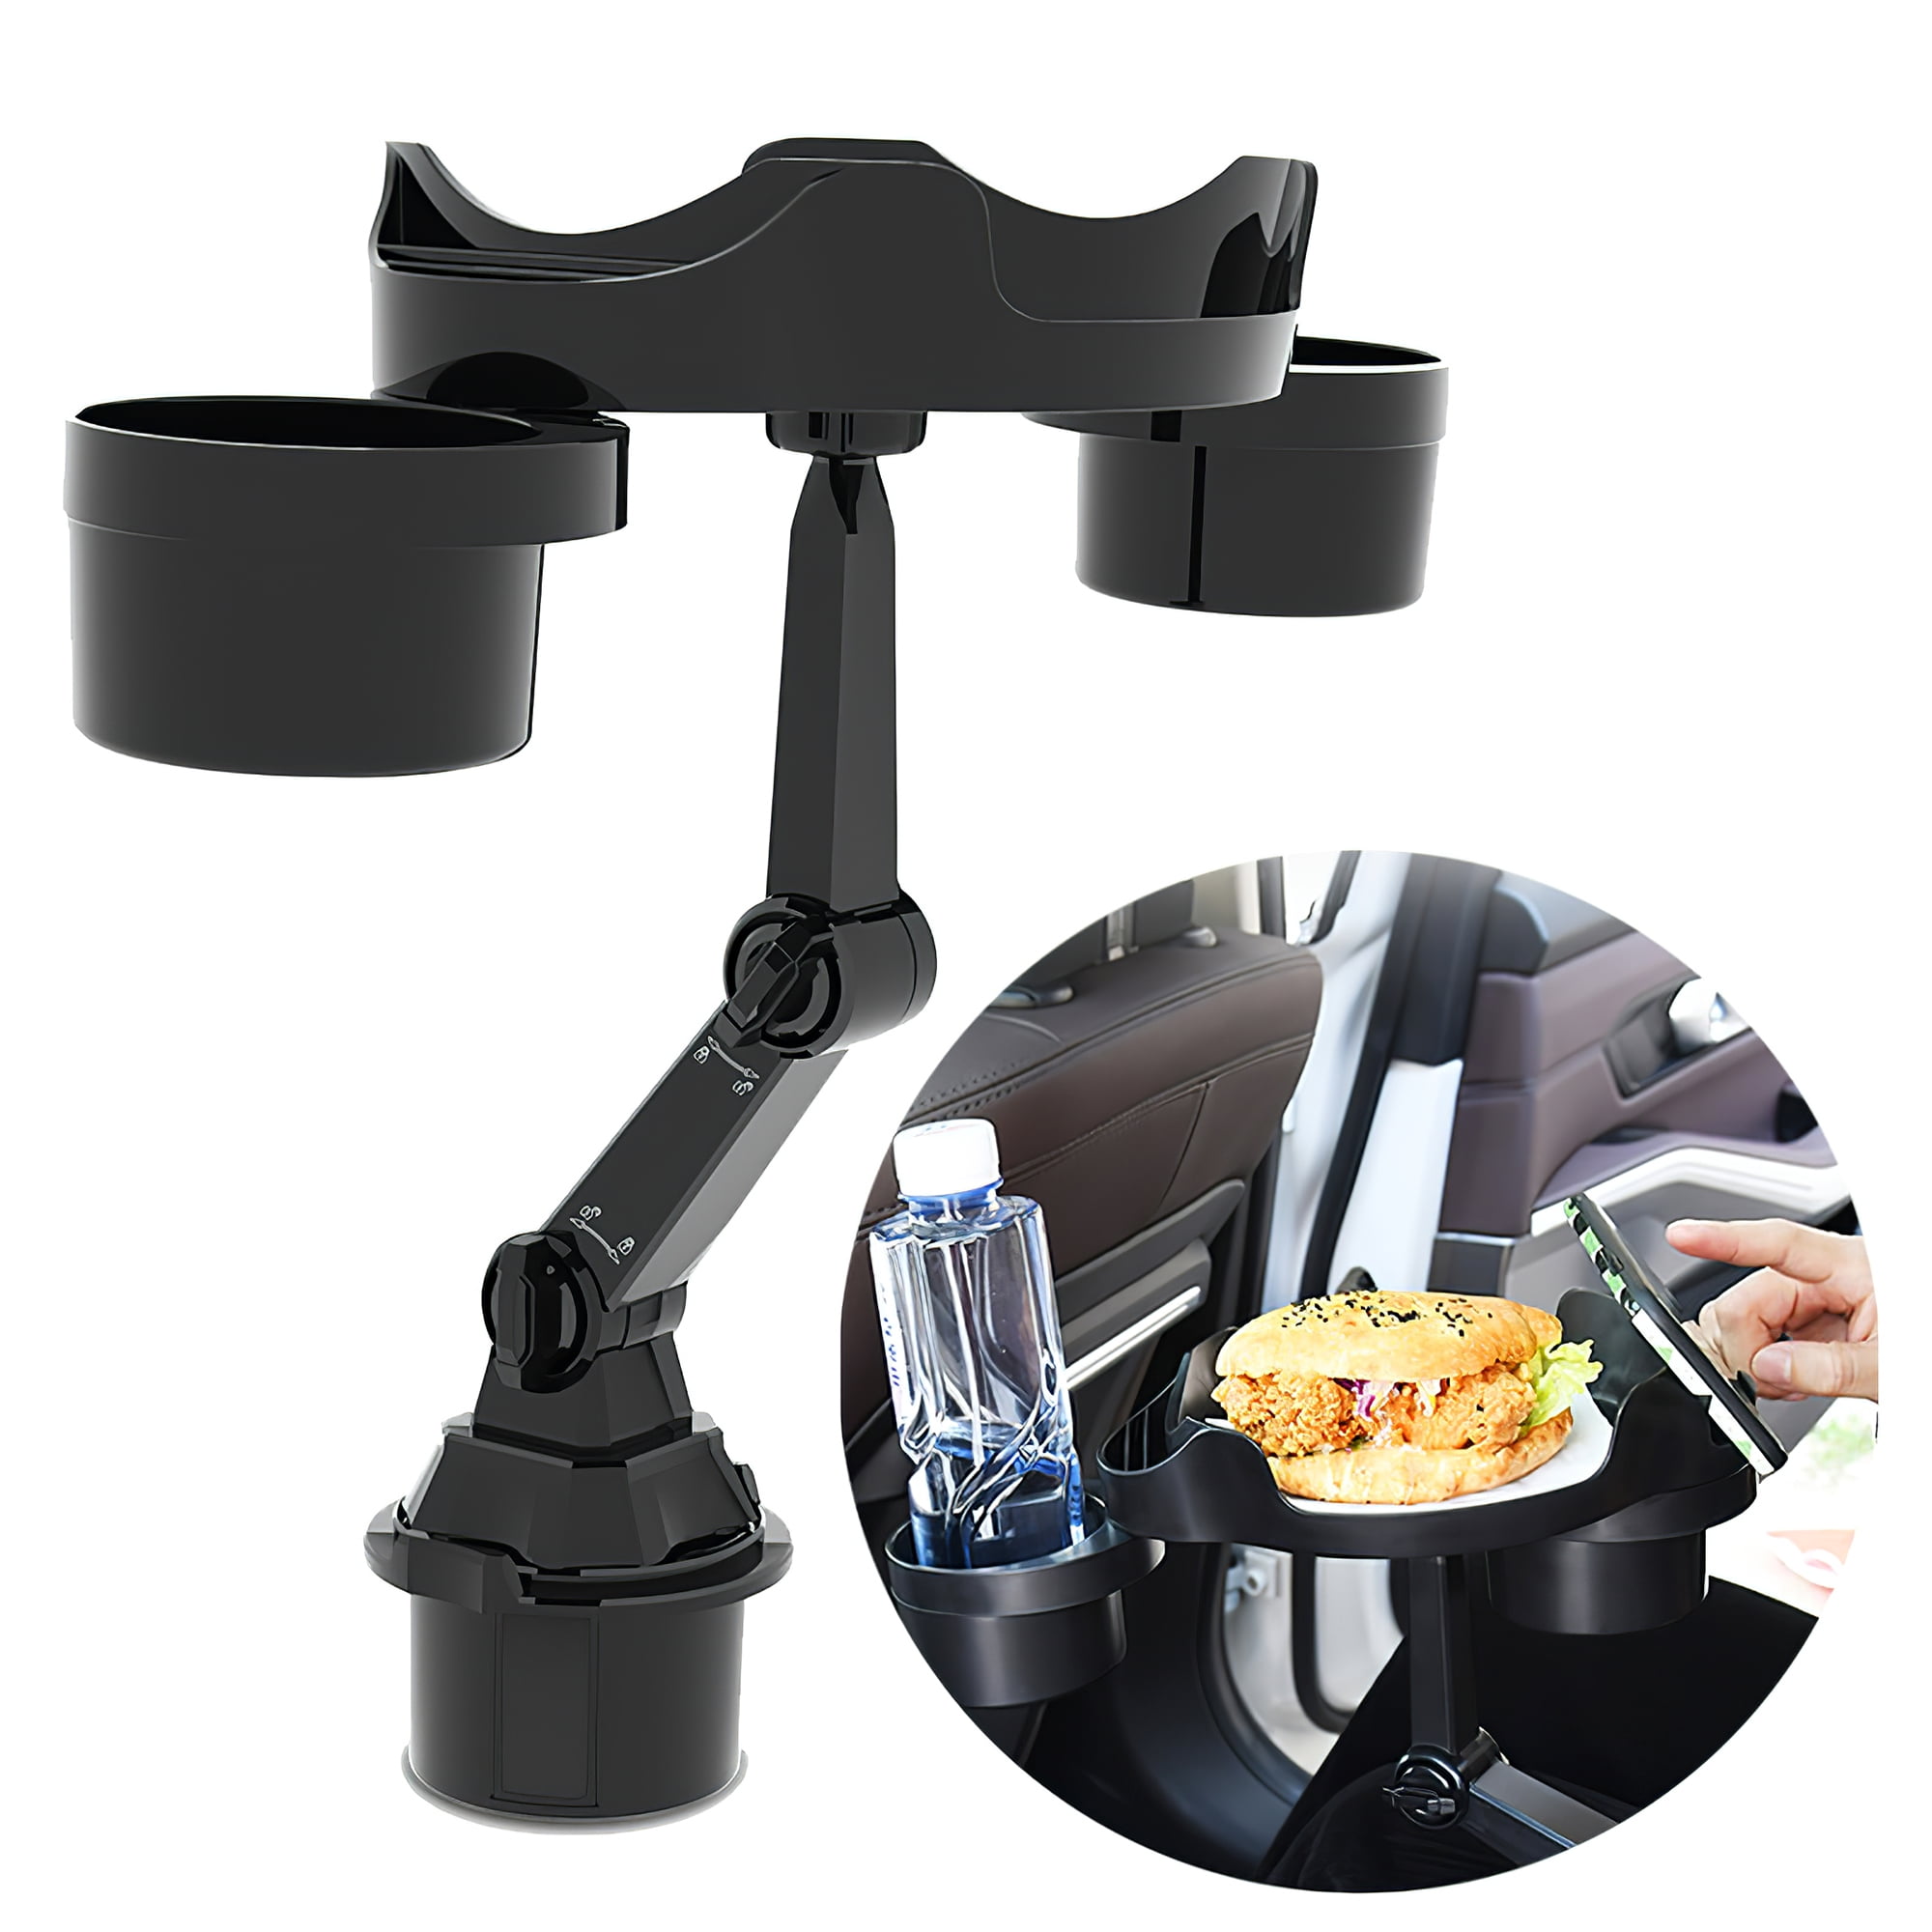 Jolfay Multifunctional Car Cup Holder Tray Table 360° Swivel Adjustable Car  Food Eating Tray Table for Cup Holders Mobile Phone Bracket